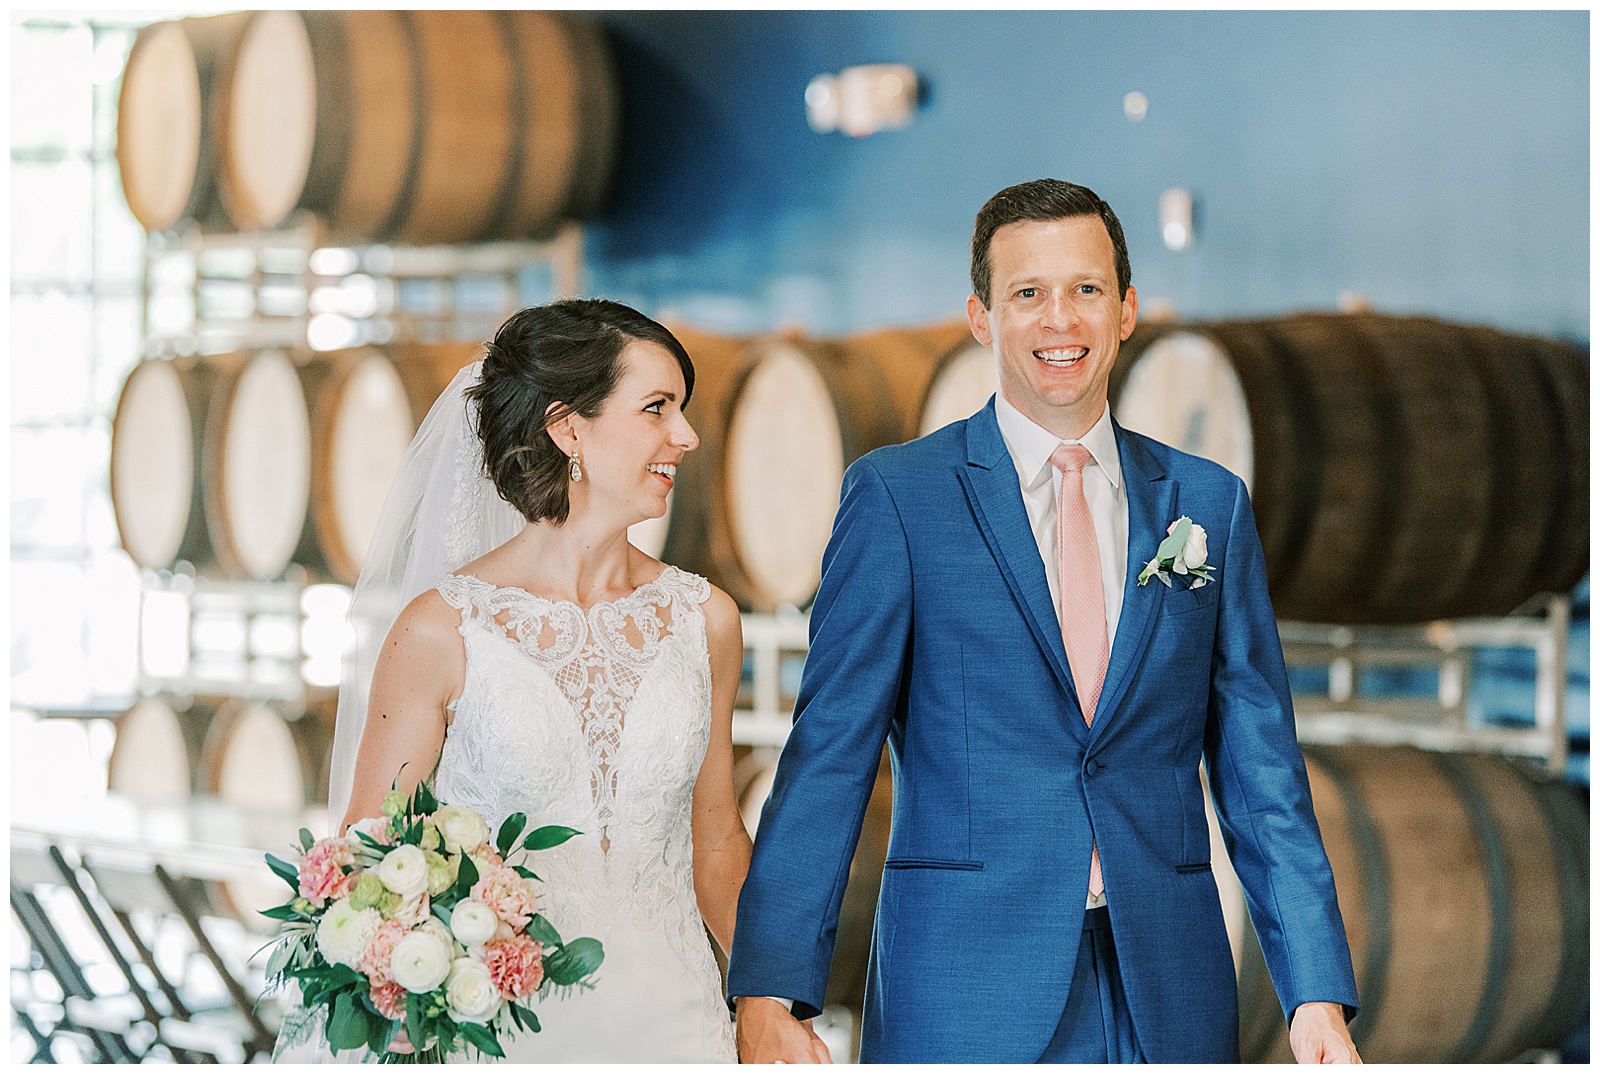 indoor summer bride groom portraits of short brown haired bride in lace dress with long train and navy blue suited groom